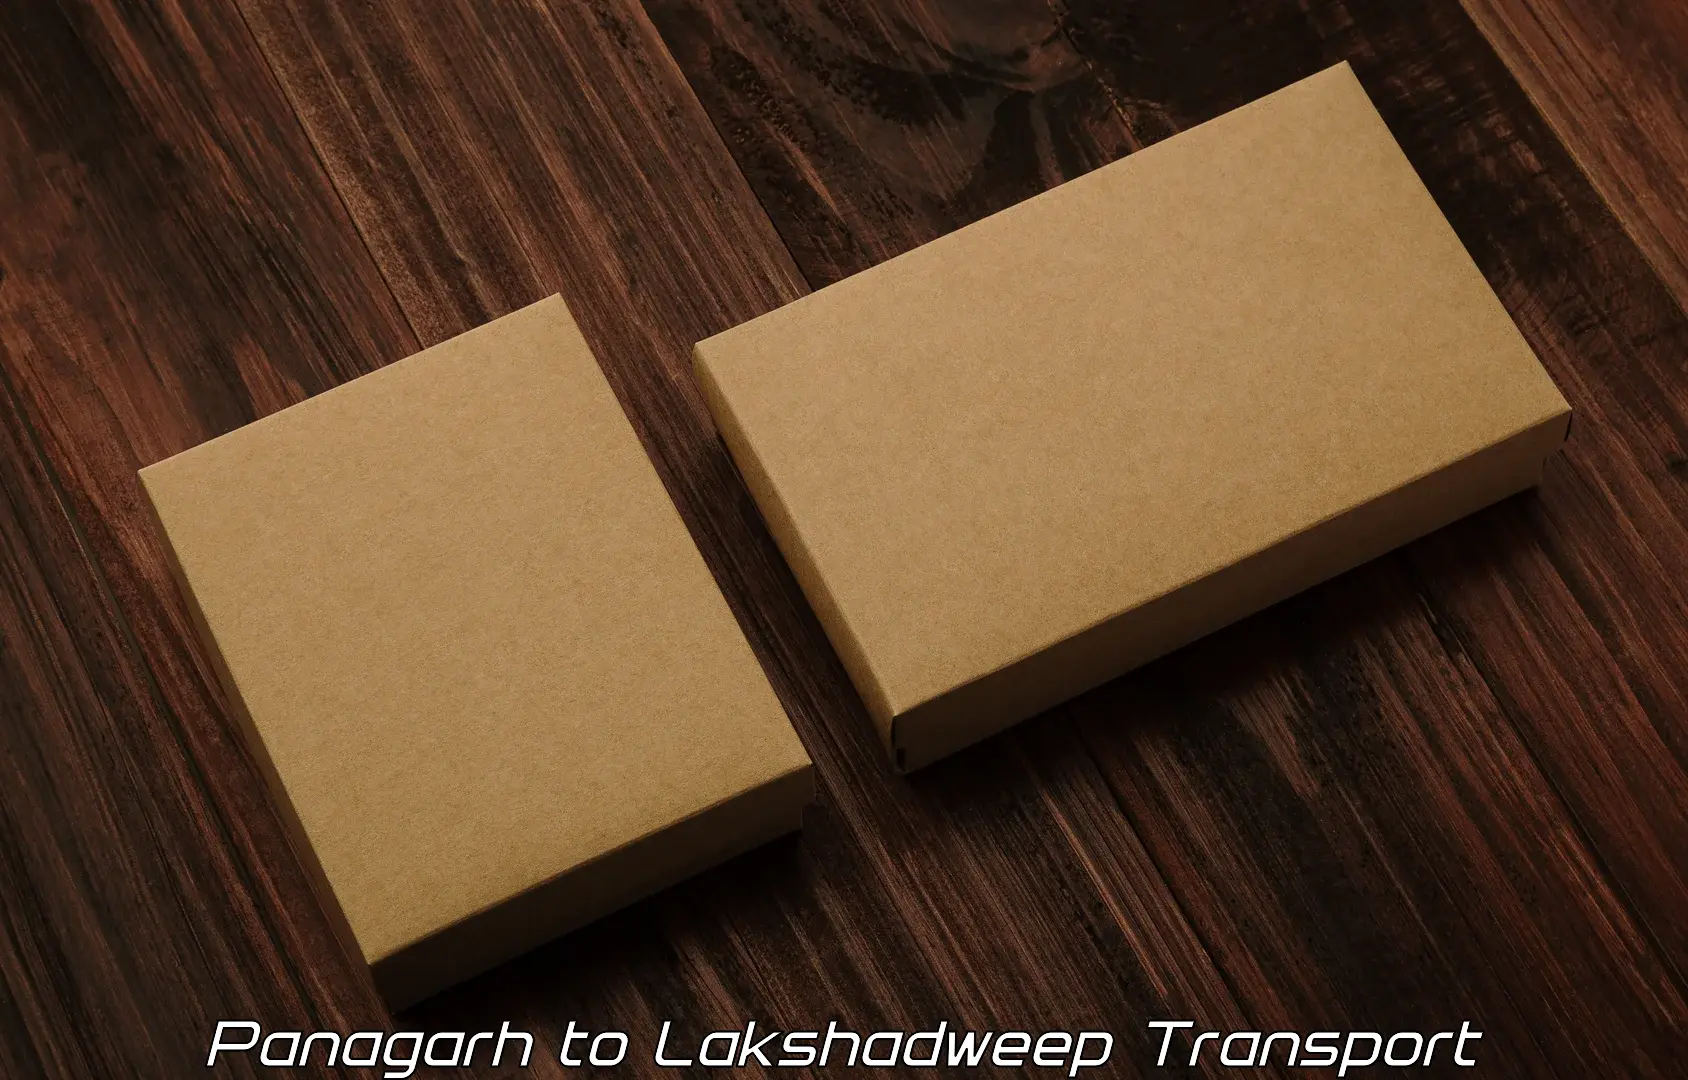 Air freight transport services Panagarh to Lakshadweep